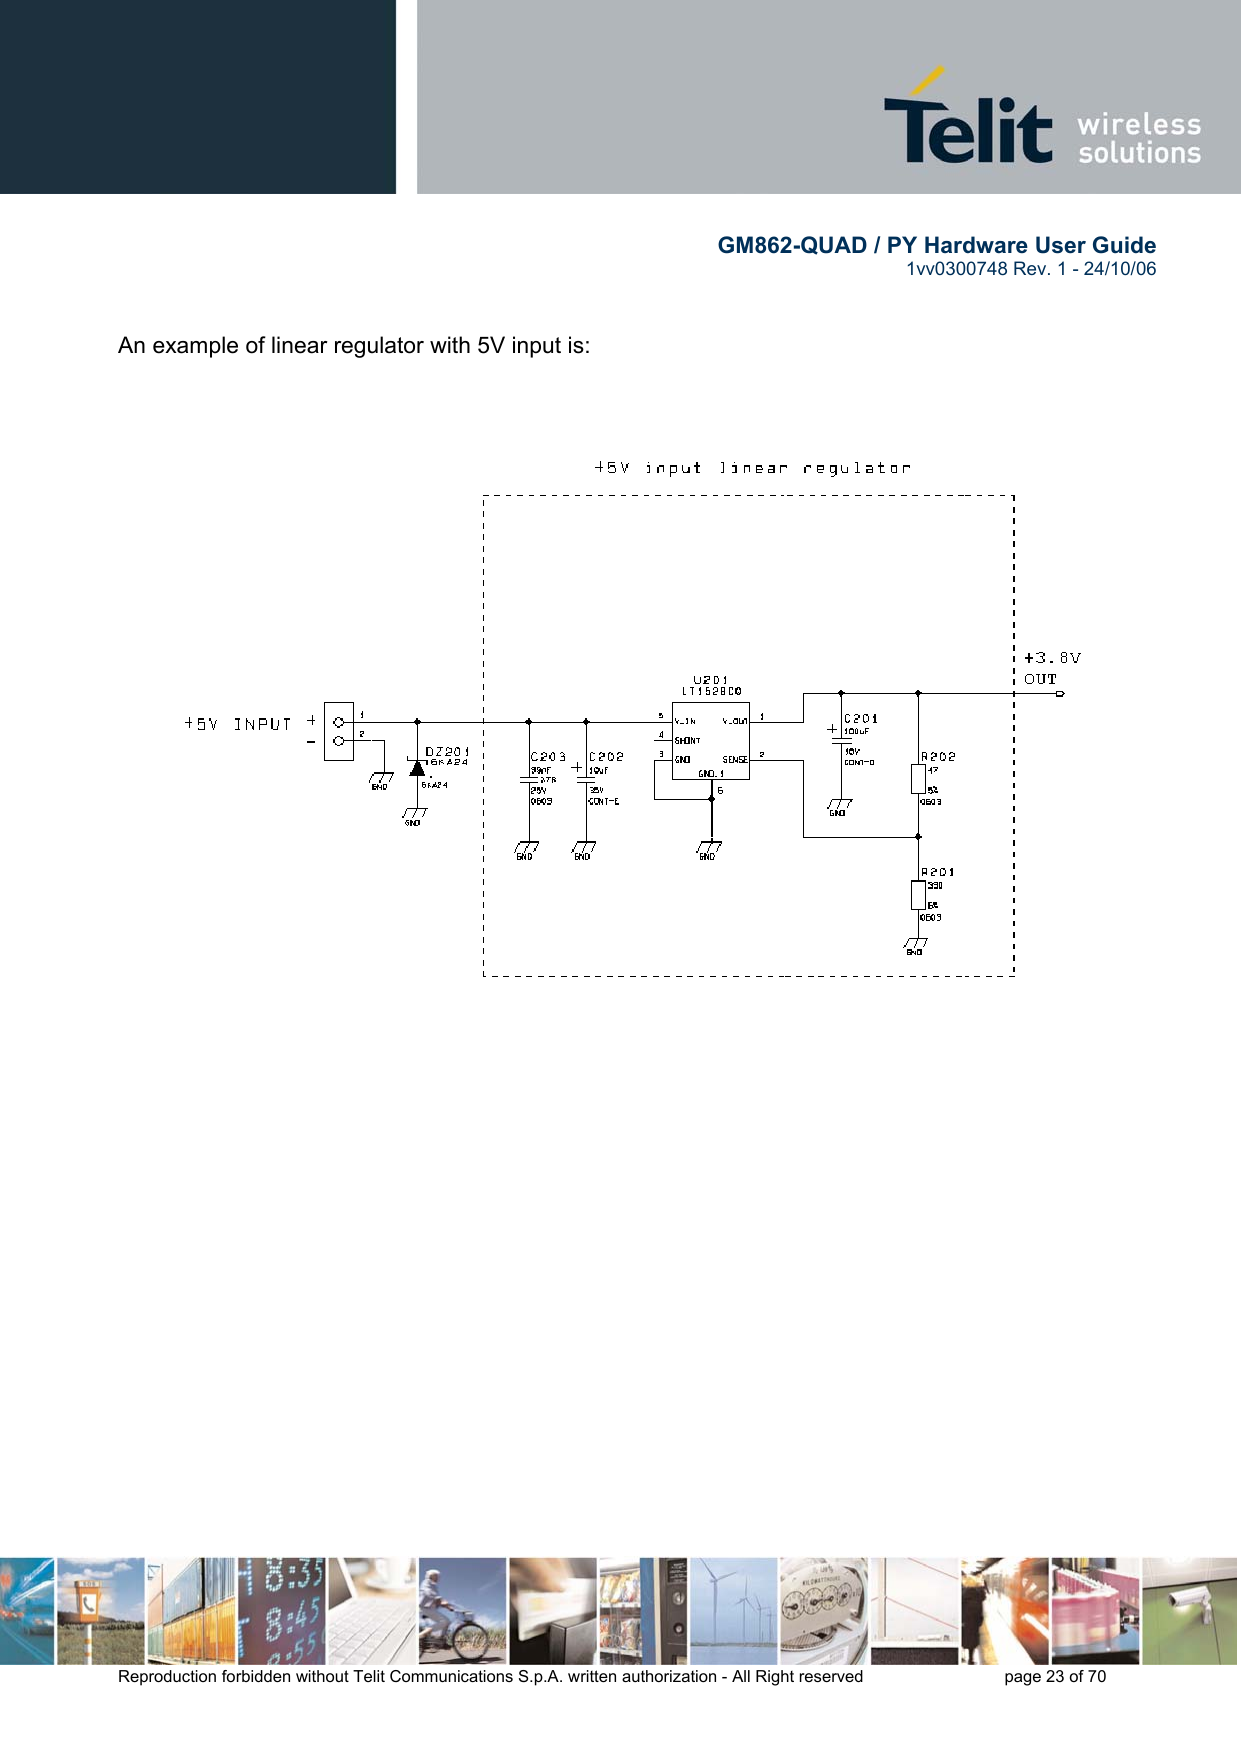        GM862-QUAD / PY Hardware User Guide   1vv0300748 Rev. 1 - 24/10/06    Reproduction forbidden without Telit Communications S.p.A. written authorization - All Right reserved    page 23 of 70    An example of linear regulator with 5V input is:       